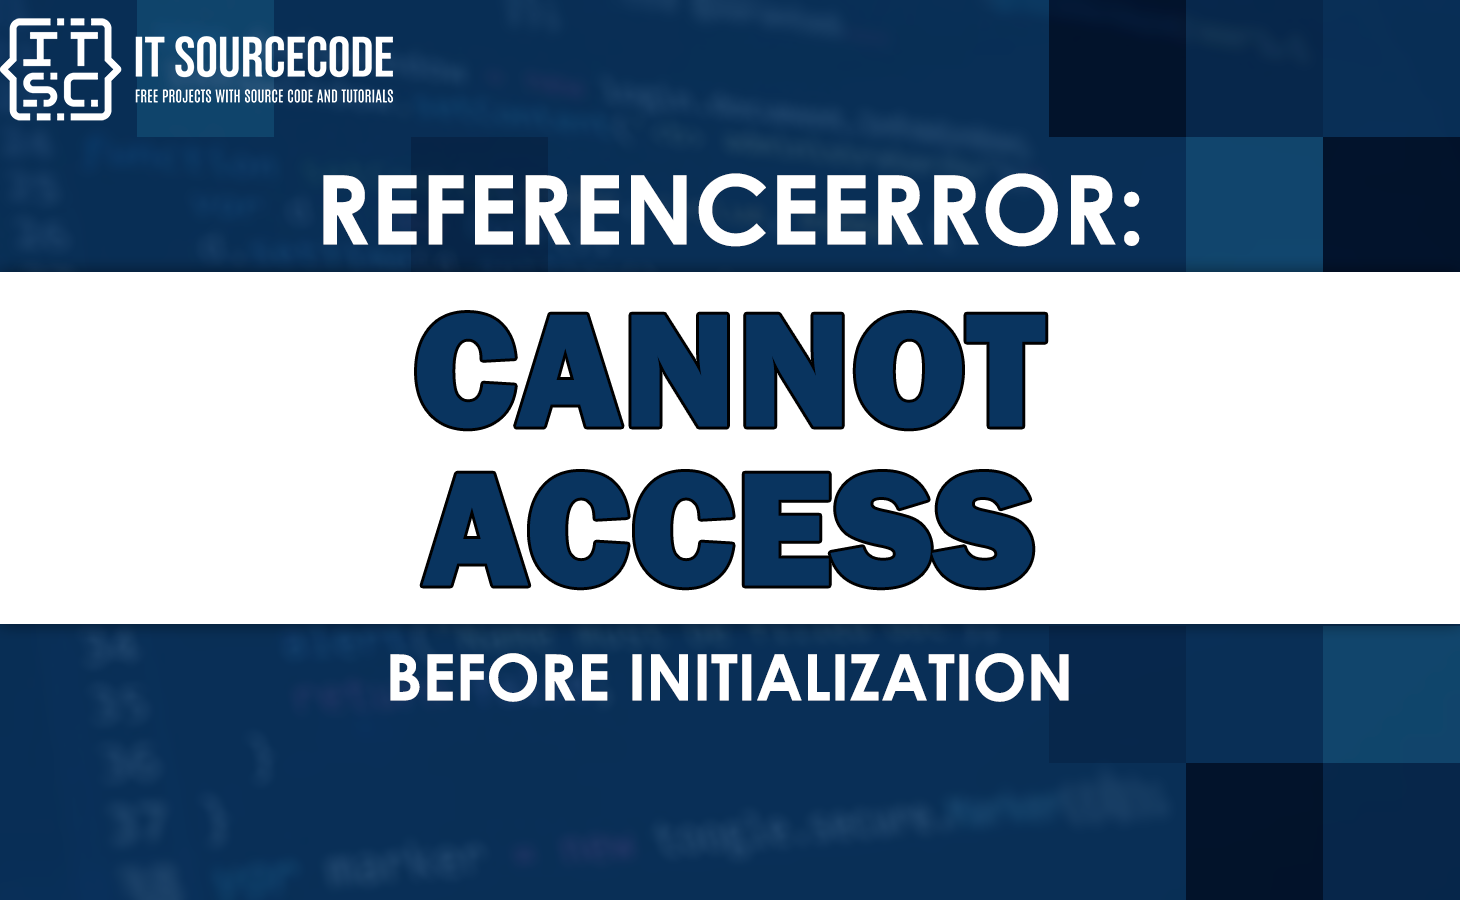 Referenceerror cannot access before initialization